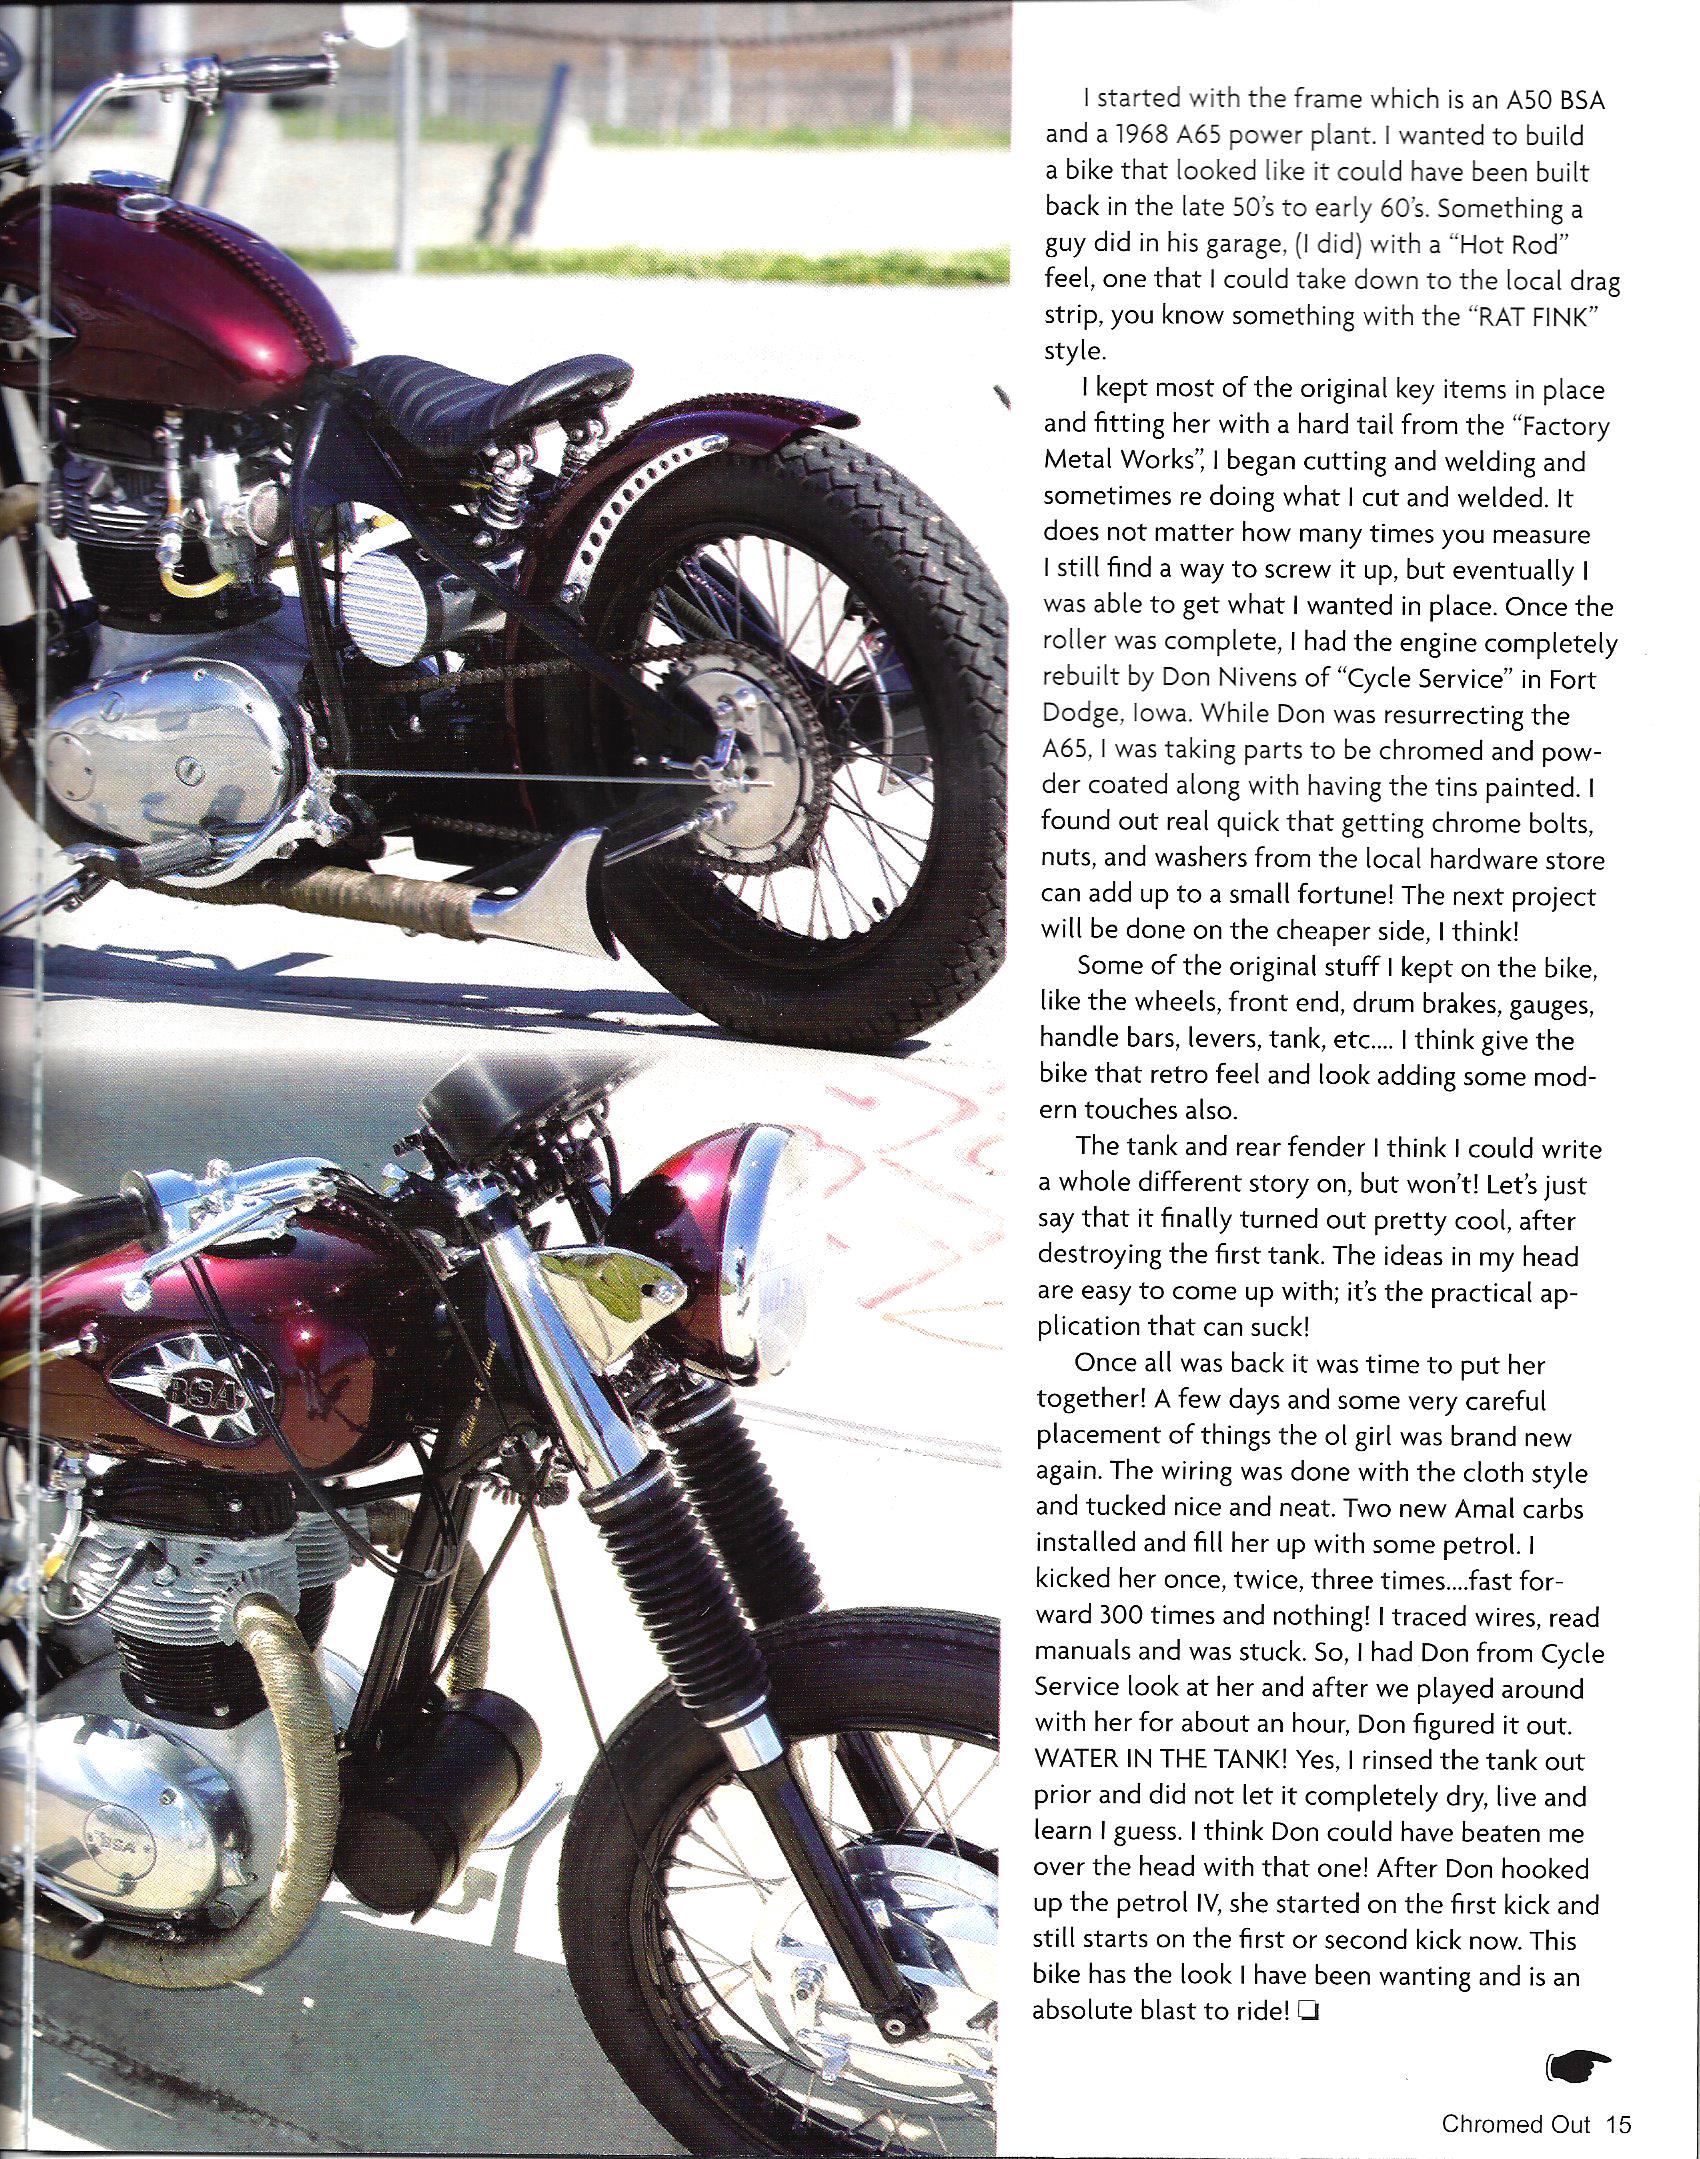 Chromed Out Magazine Article on 1968 BSA page 2